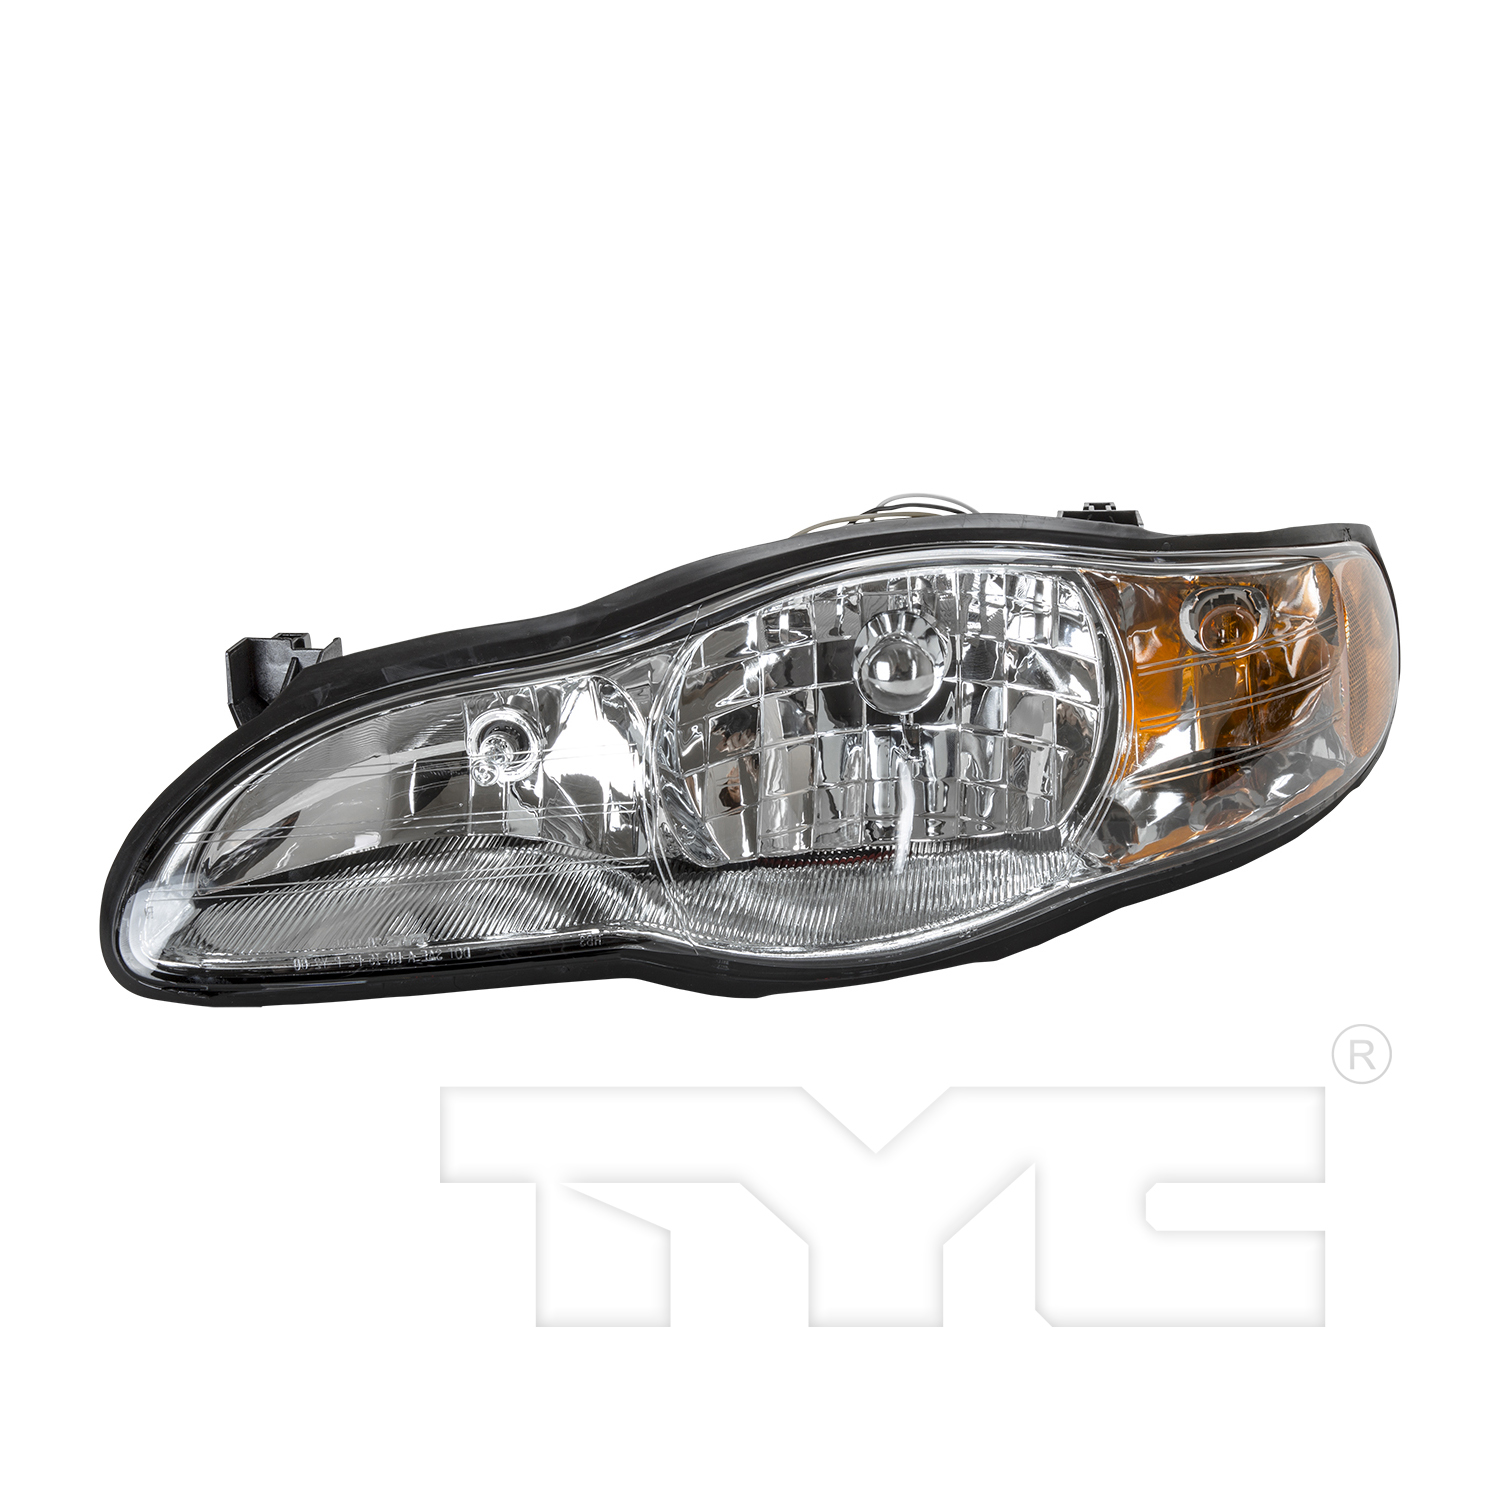 Aftermarket HEADLIGHTS for CHEVROLET - MONTE CARLO, MONTE CARLO,00-05,LT Headlamp assy composite